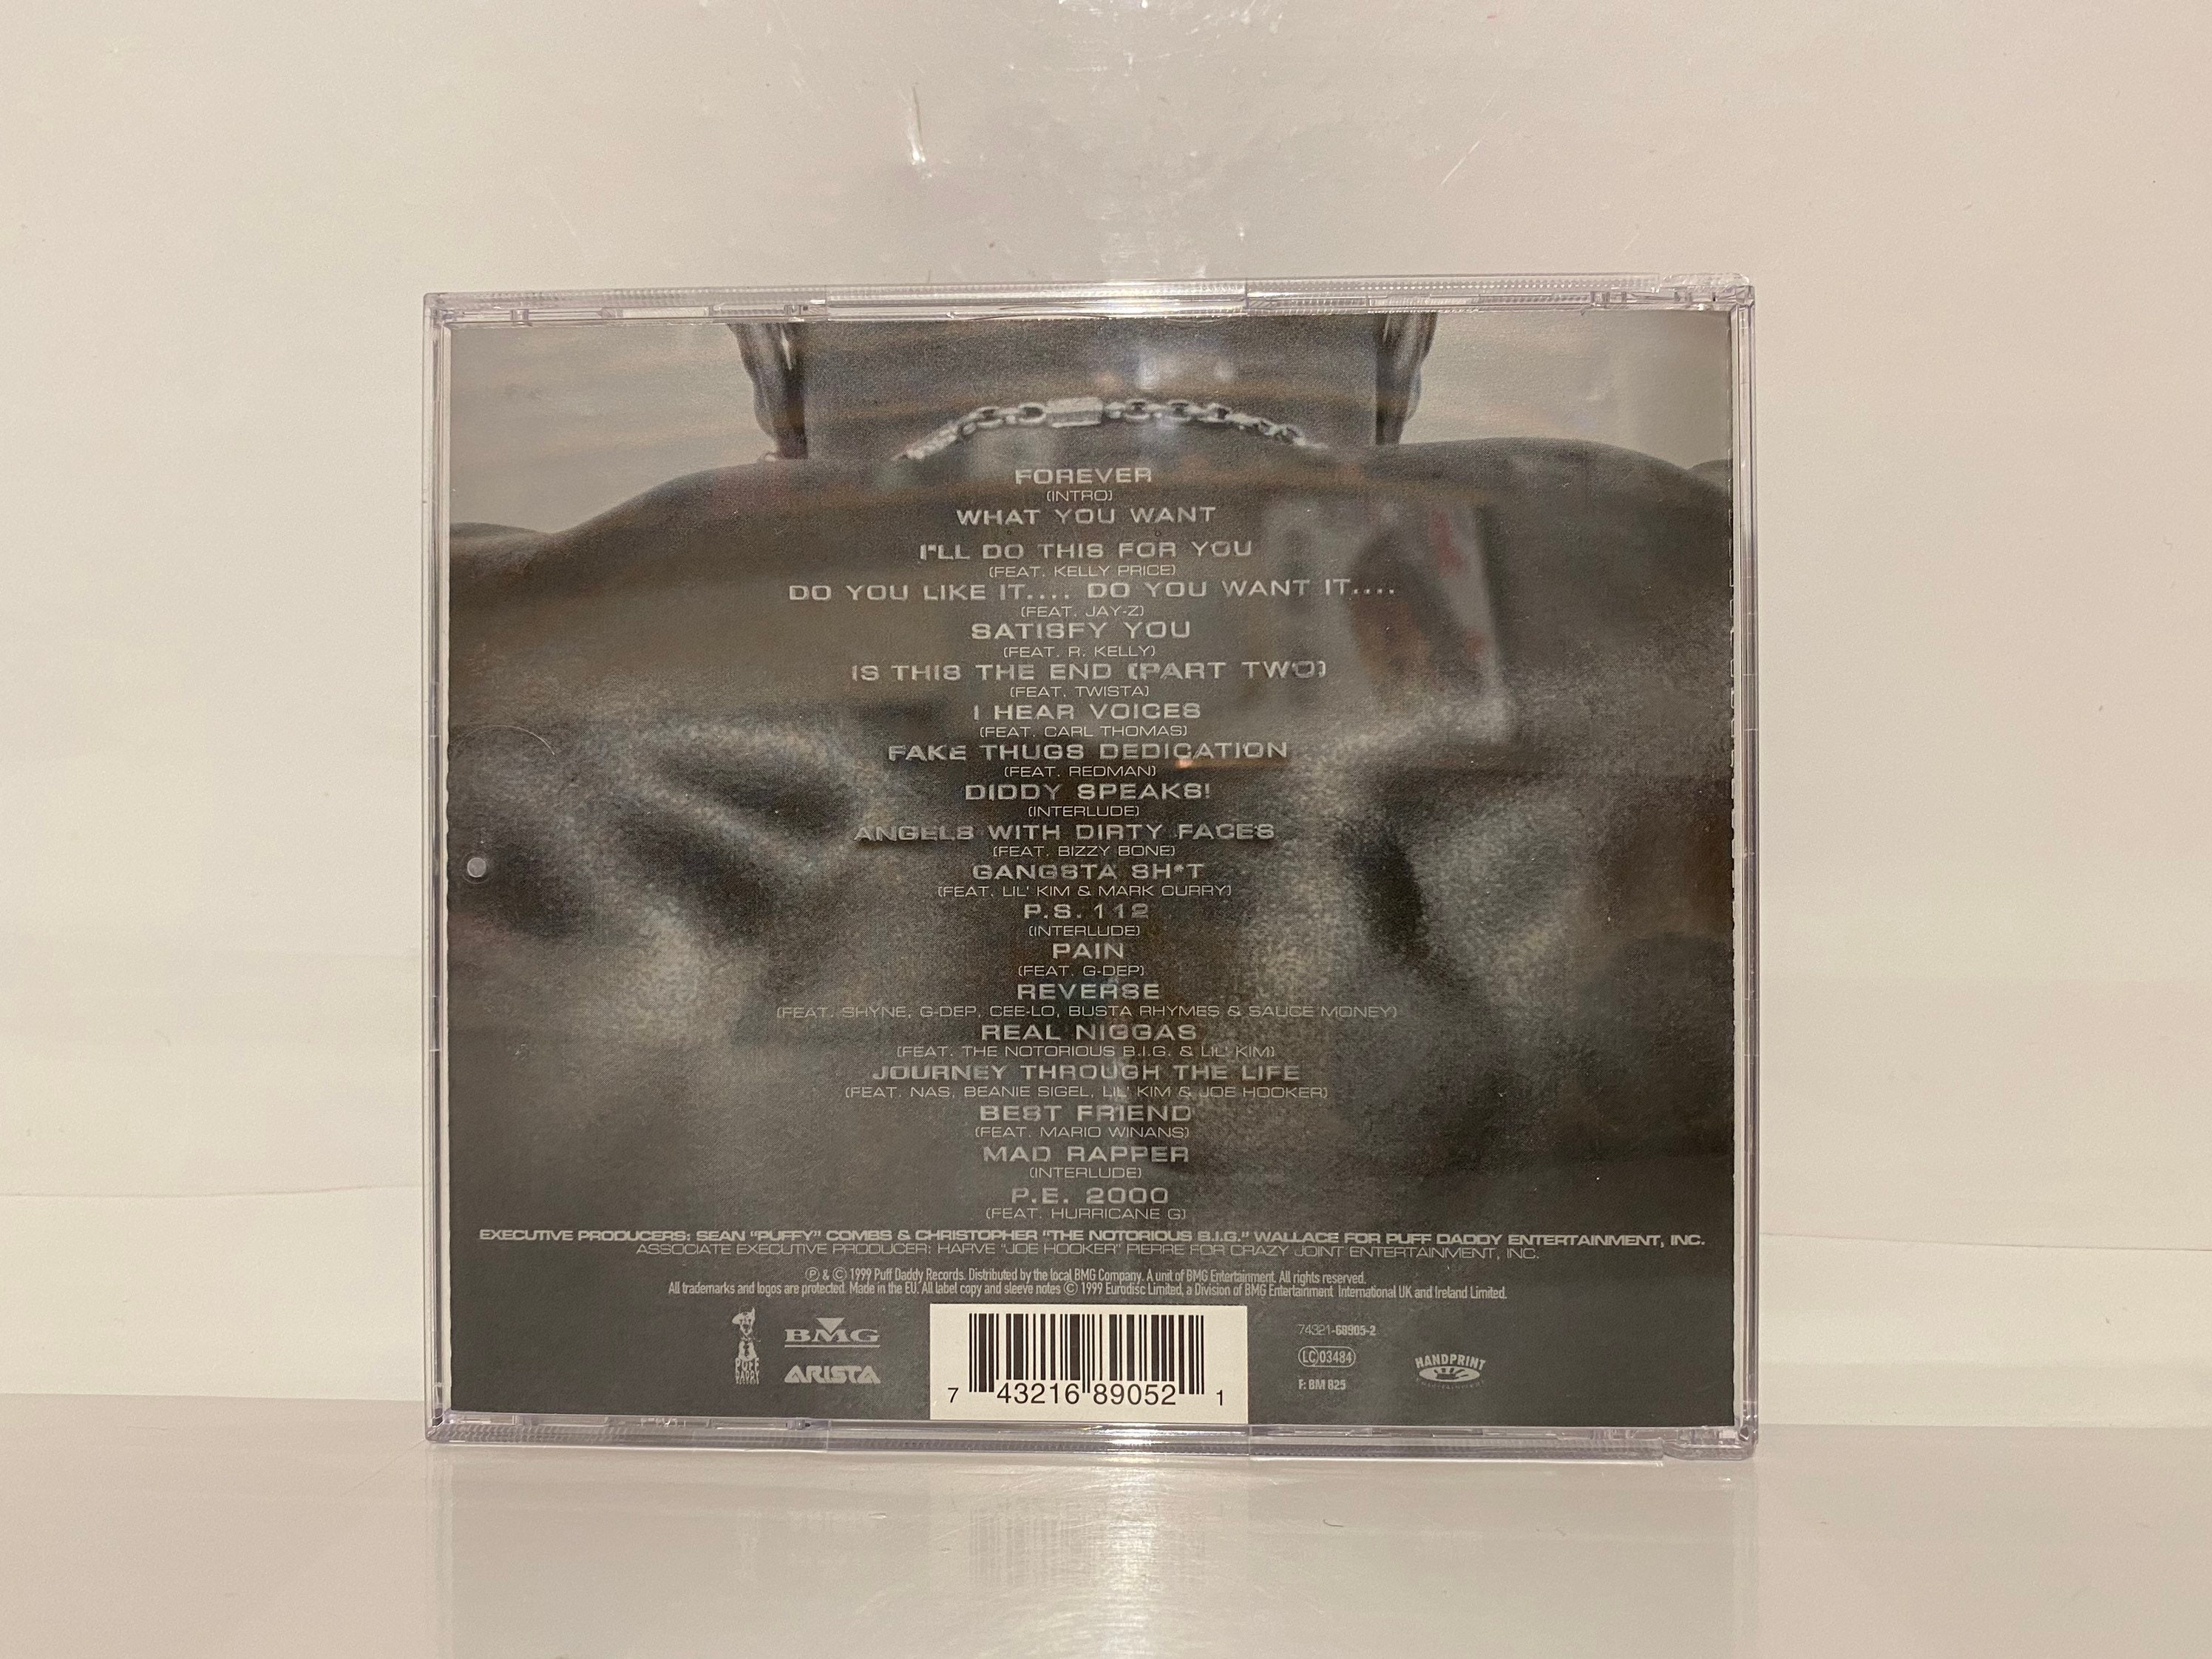 cd6042 p. diddy press play cd segunda mano - Buy CD's of other music styles  on todocoleccion